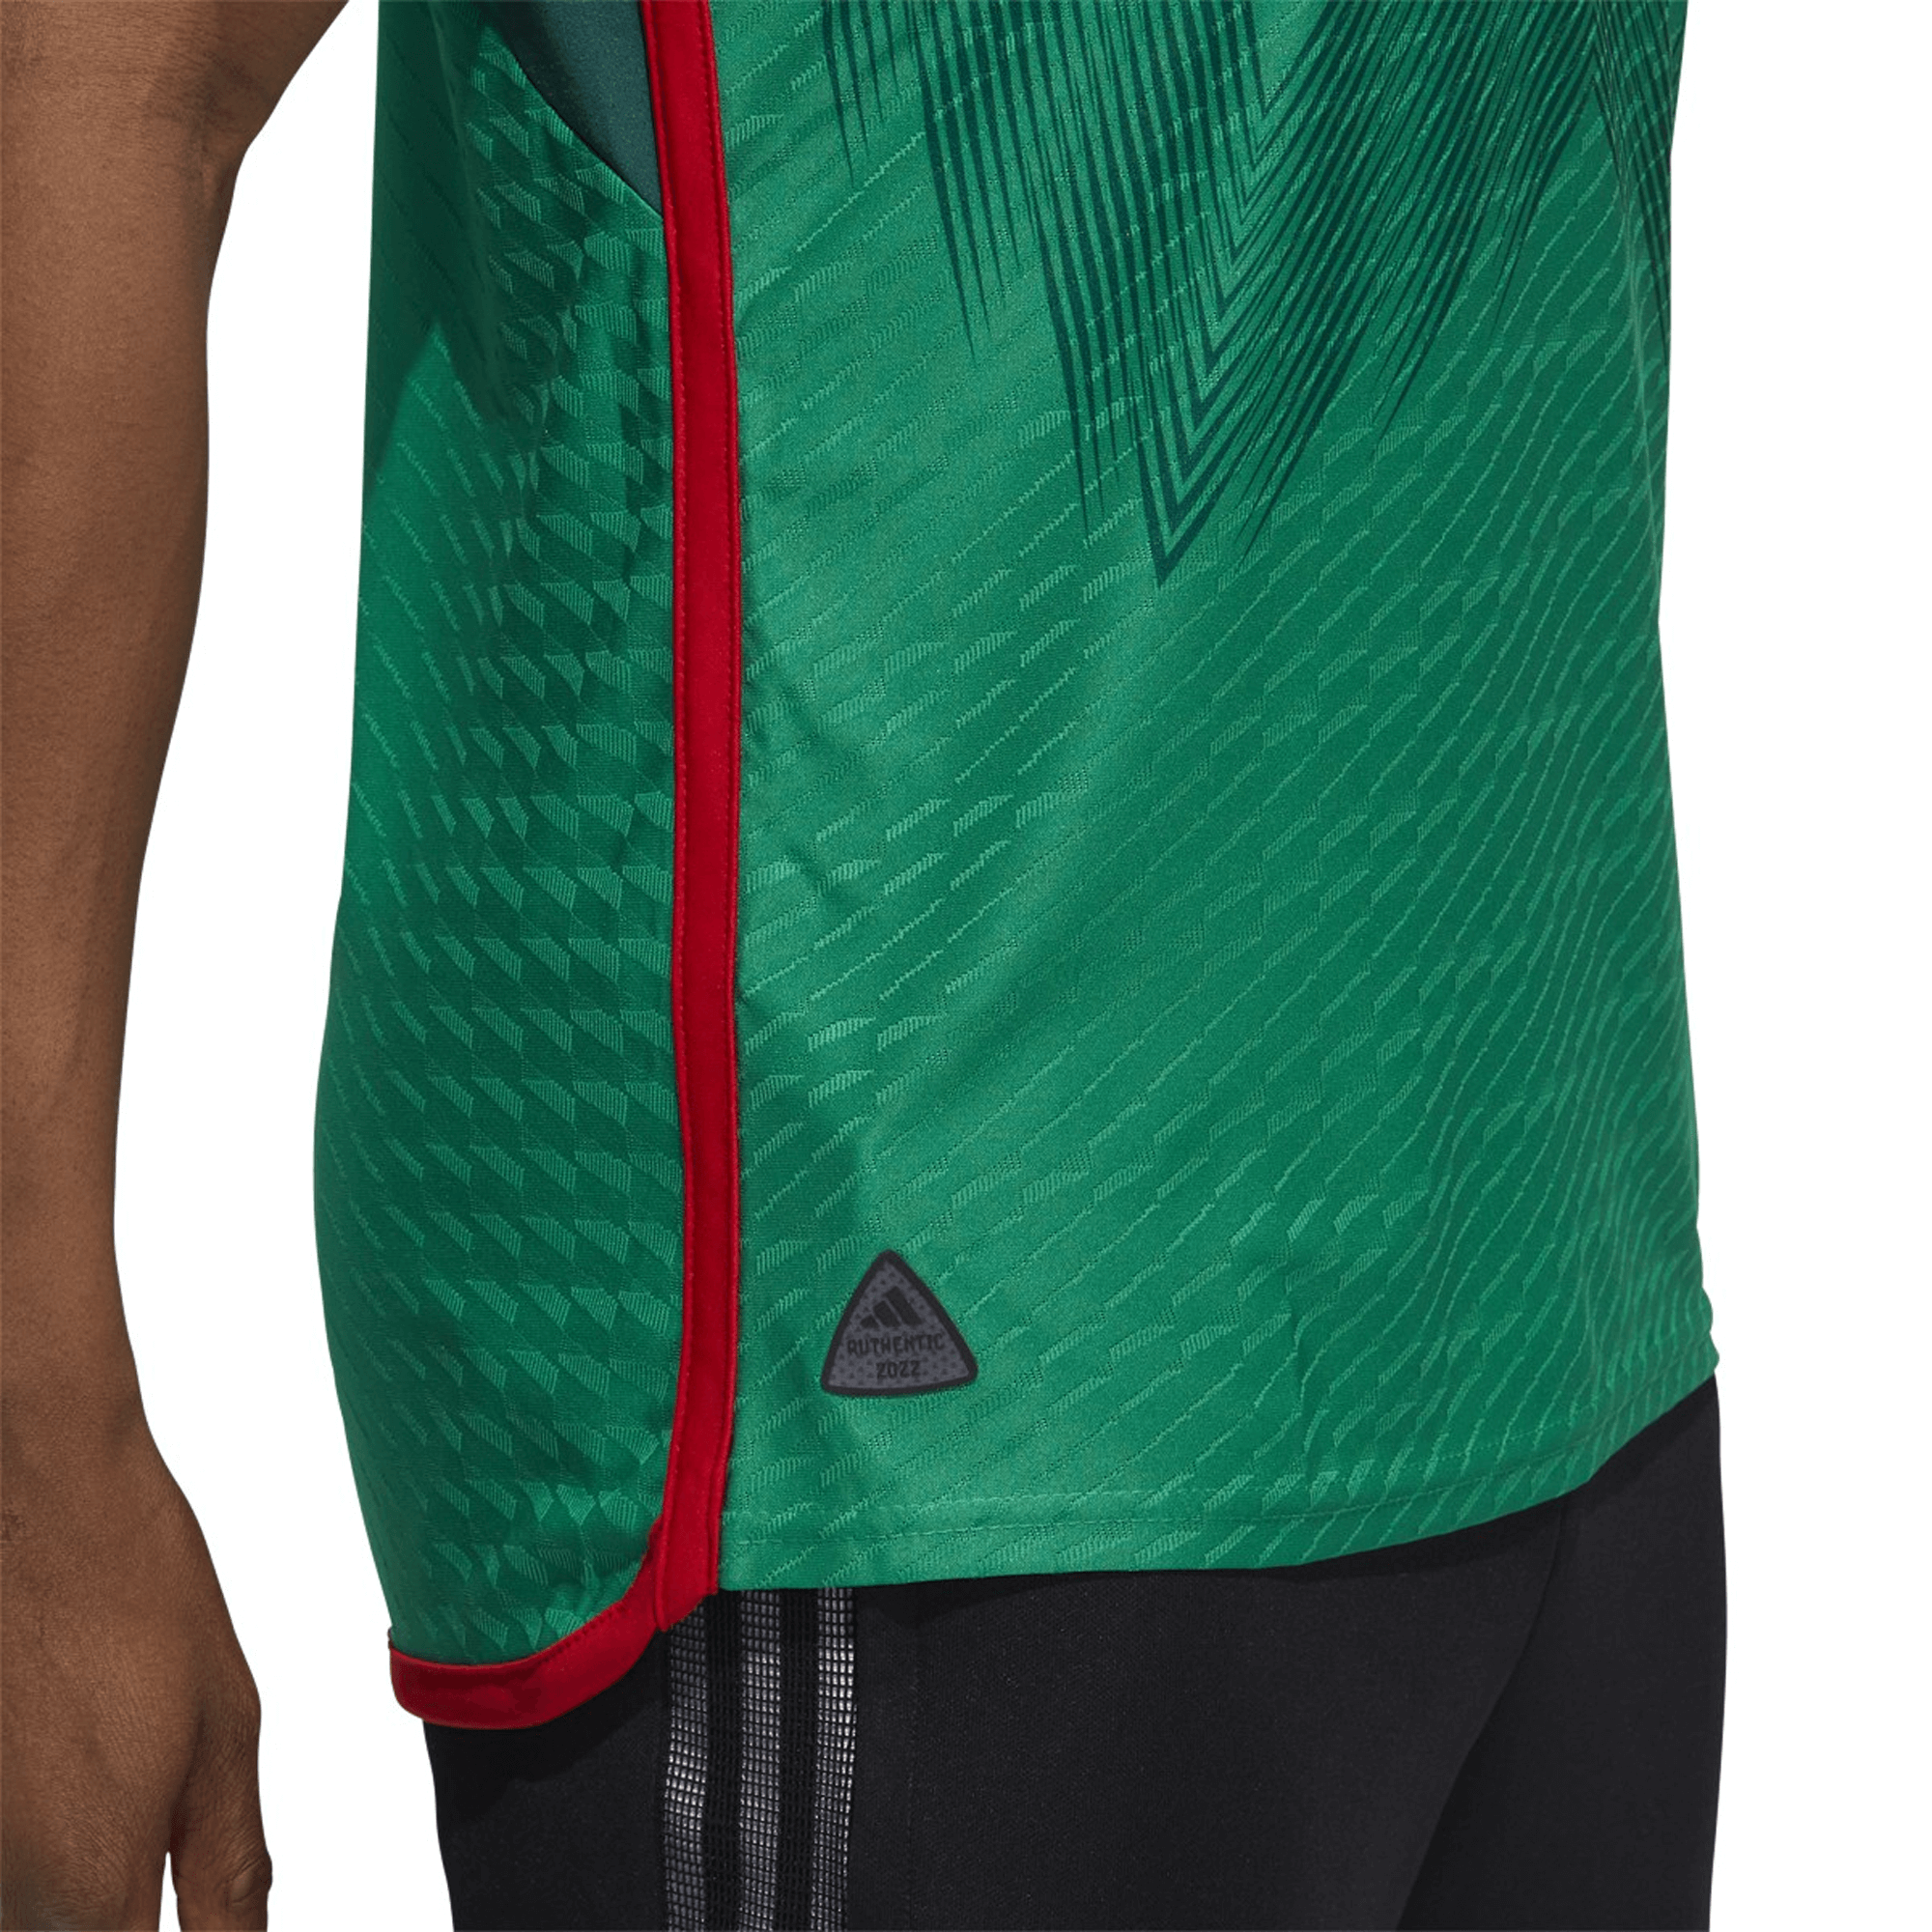 adidas 22-23 Mexico Authentic Home Jersey - Green - Soccer Shop USA